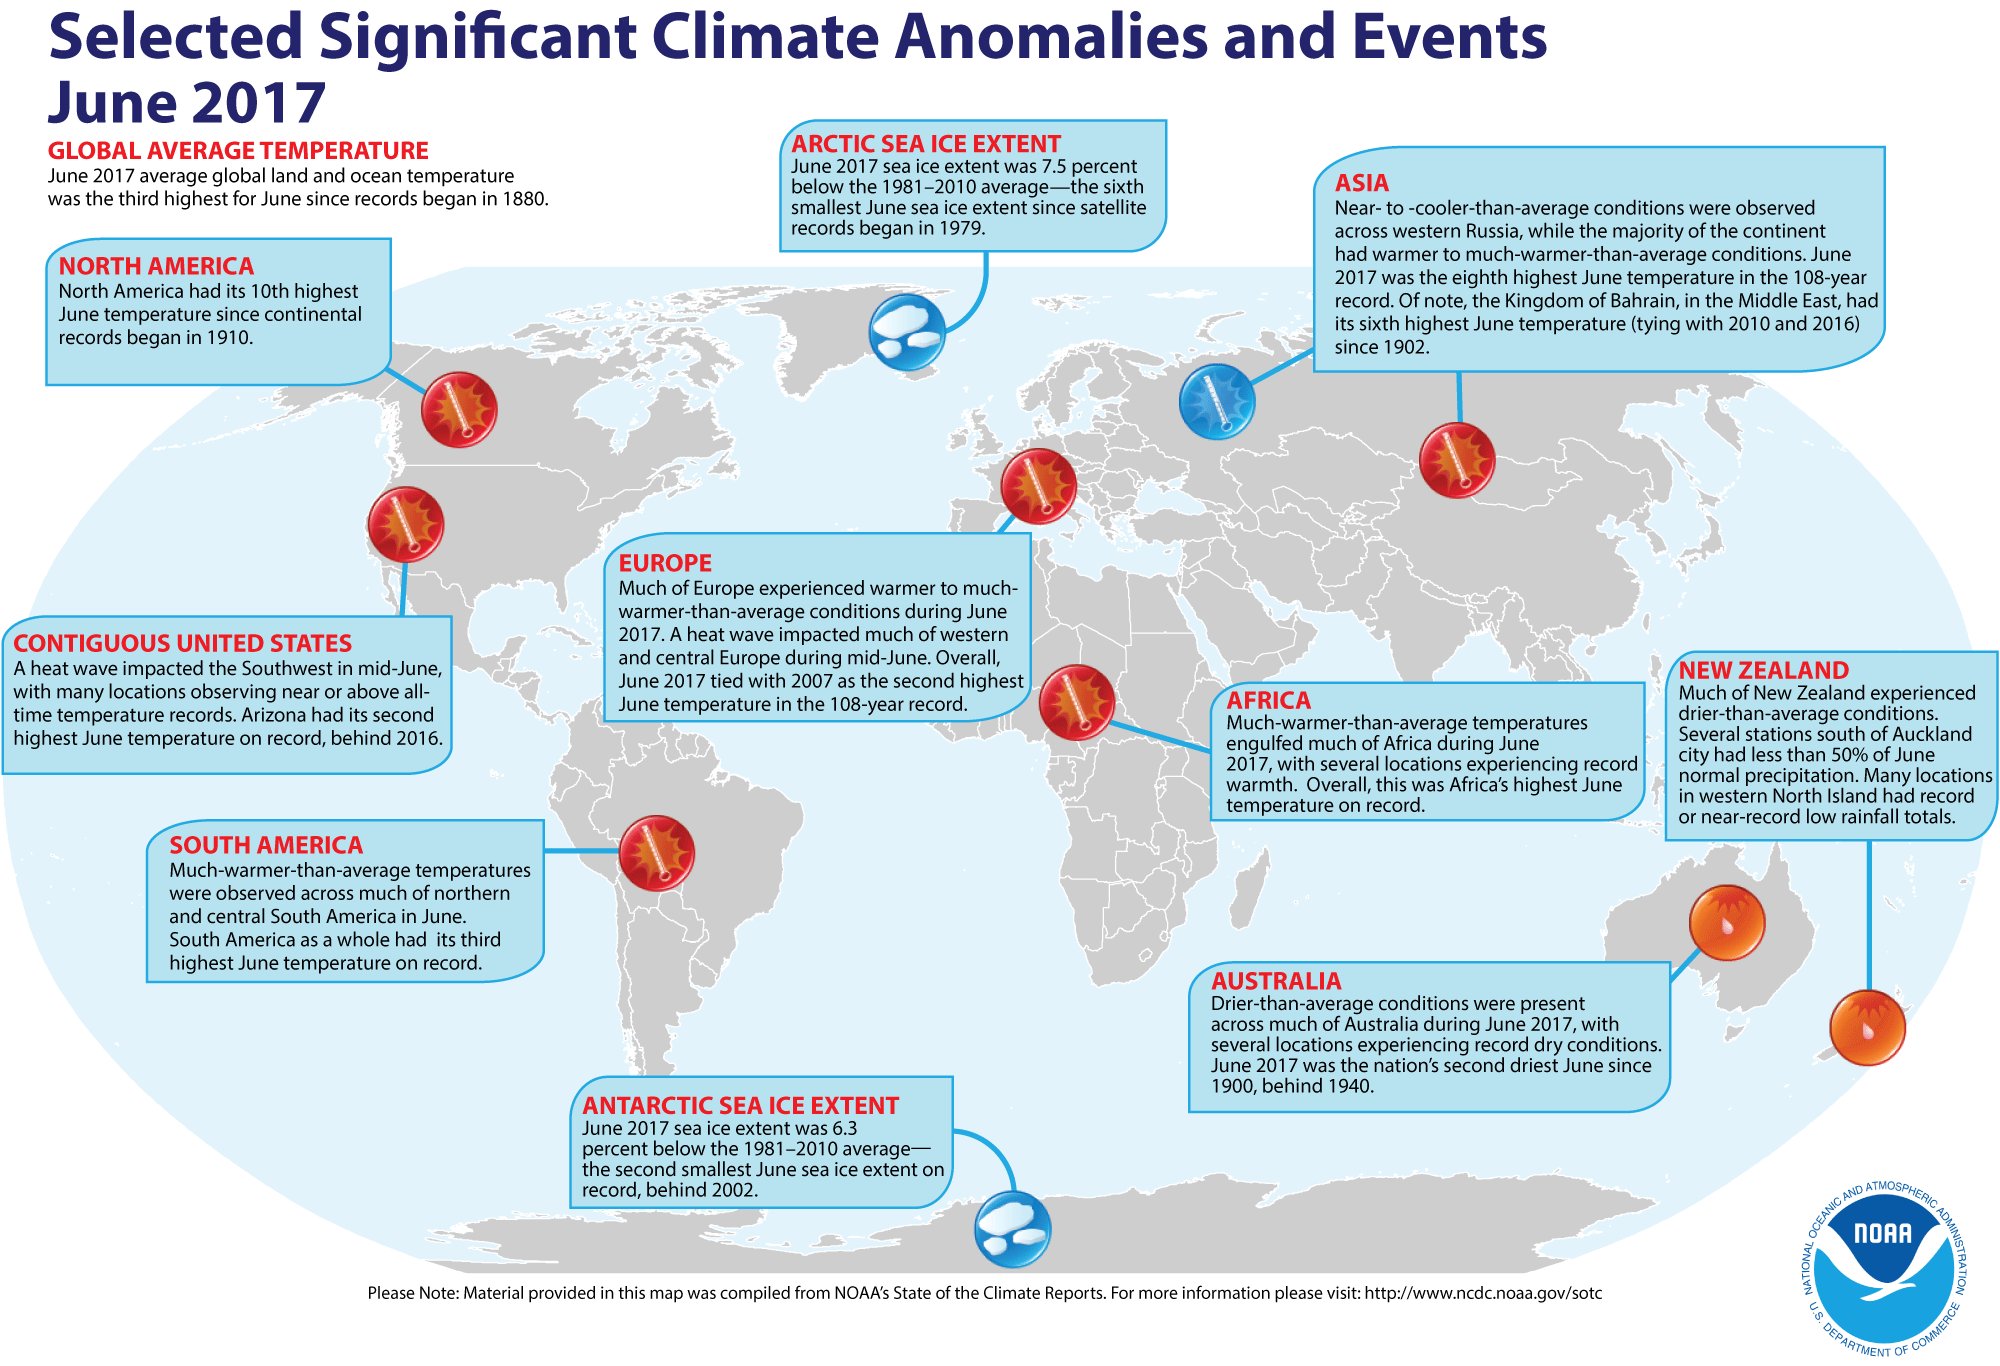 A map of significant climate events that occurred around the world in June 2017.